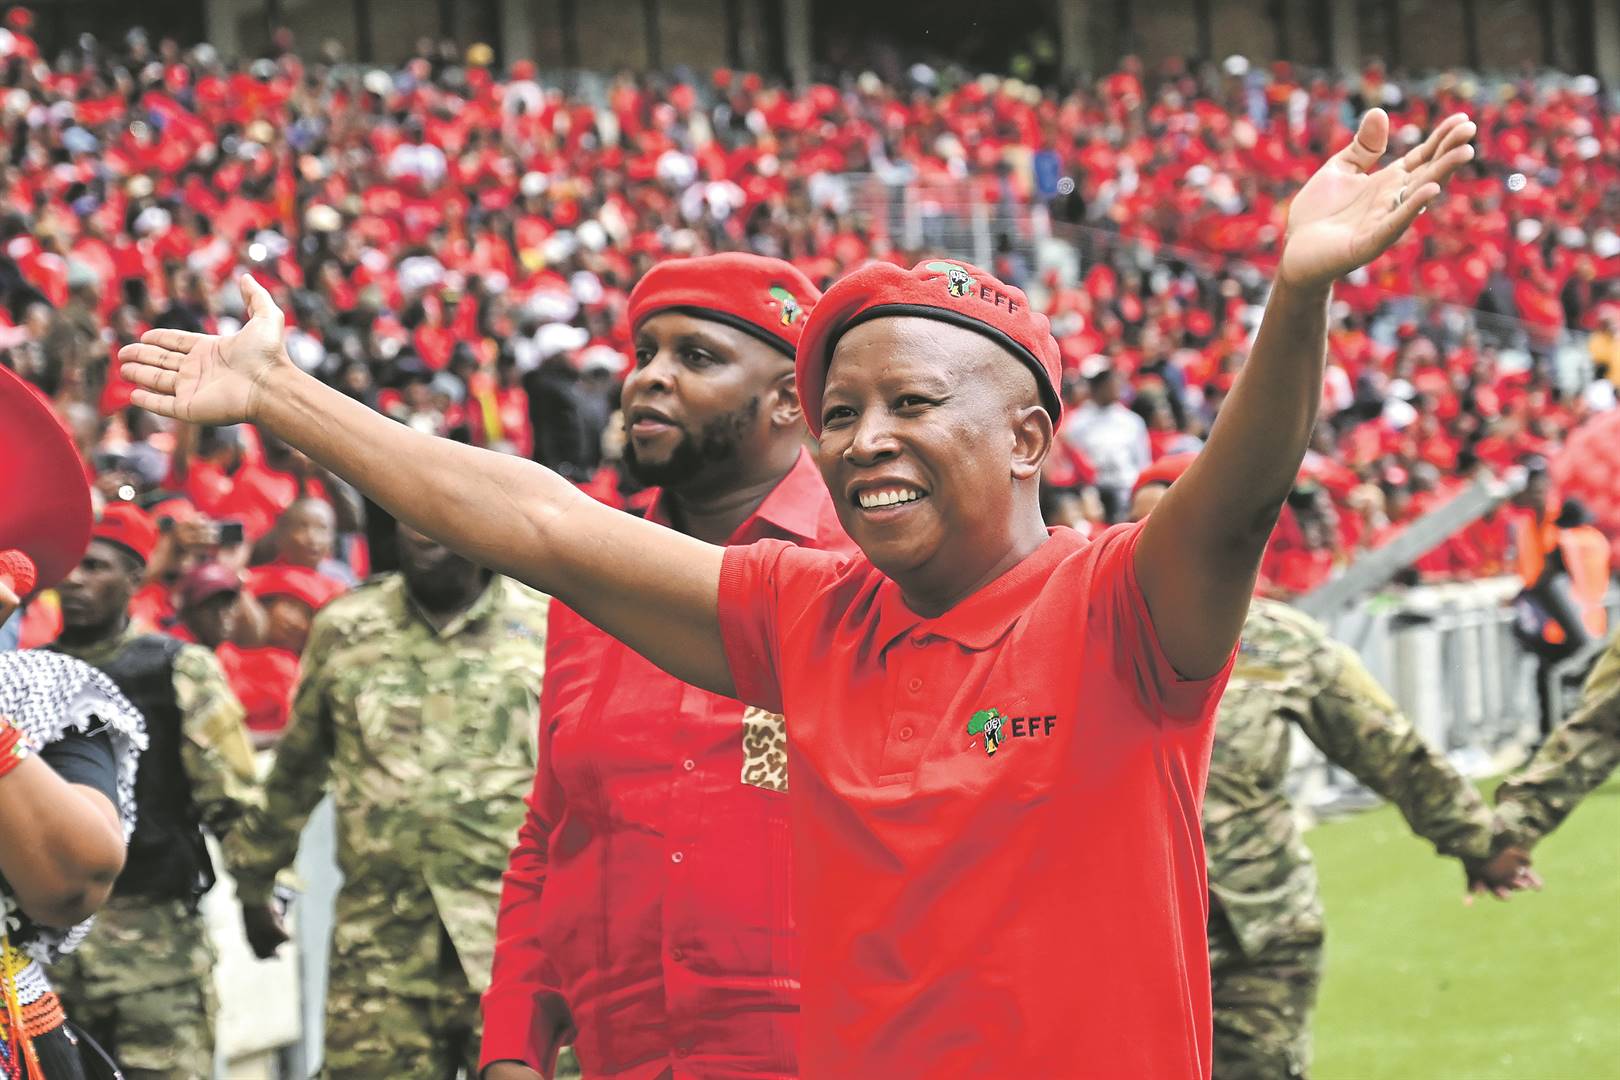 News24 | Matuba Mahlatjie | The 'pink vote' is a political football on the campaign trail